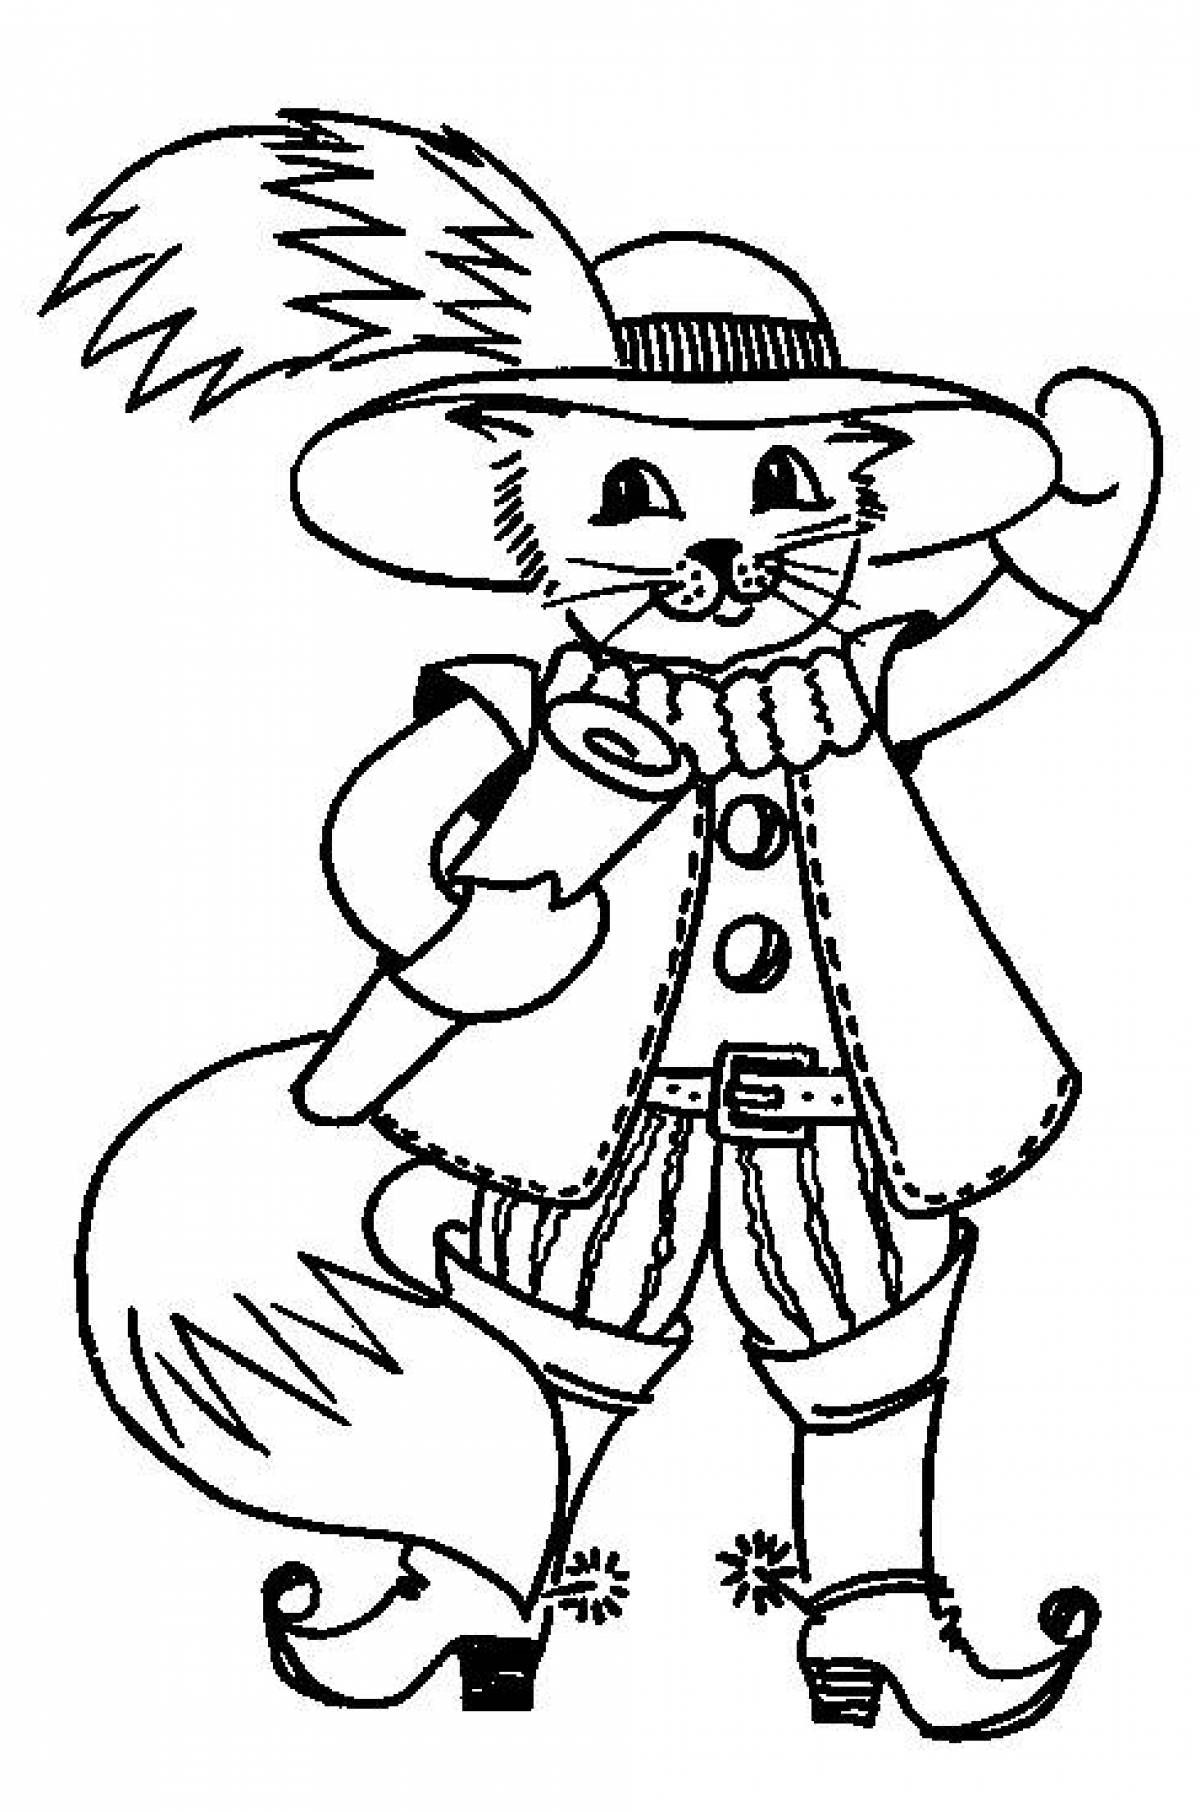 Entertaining coloring book puss in boots for kids